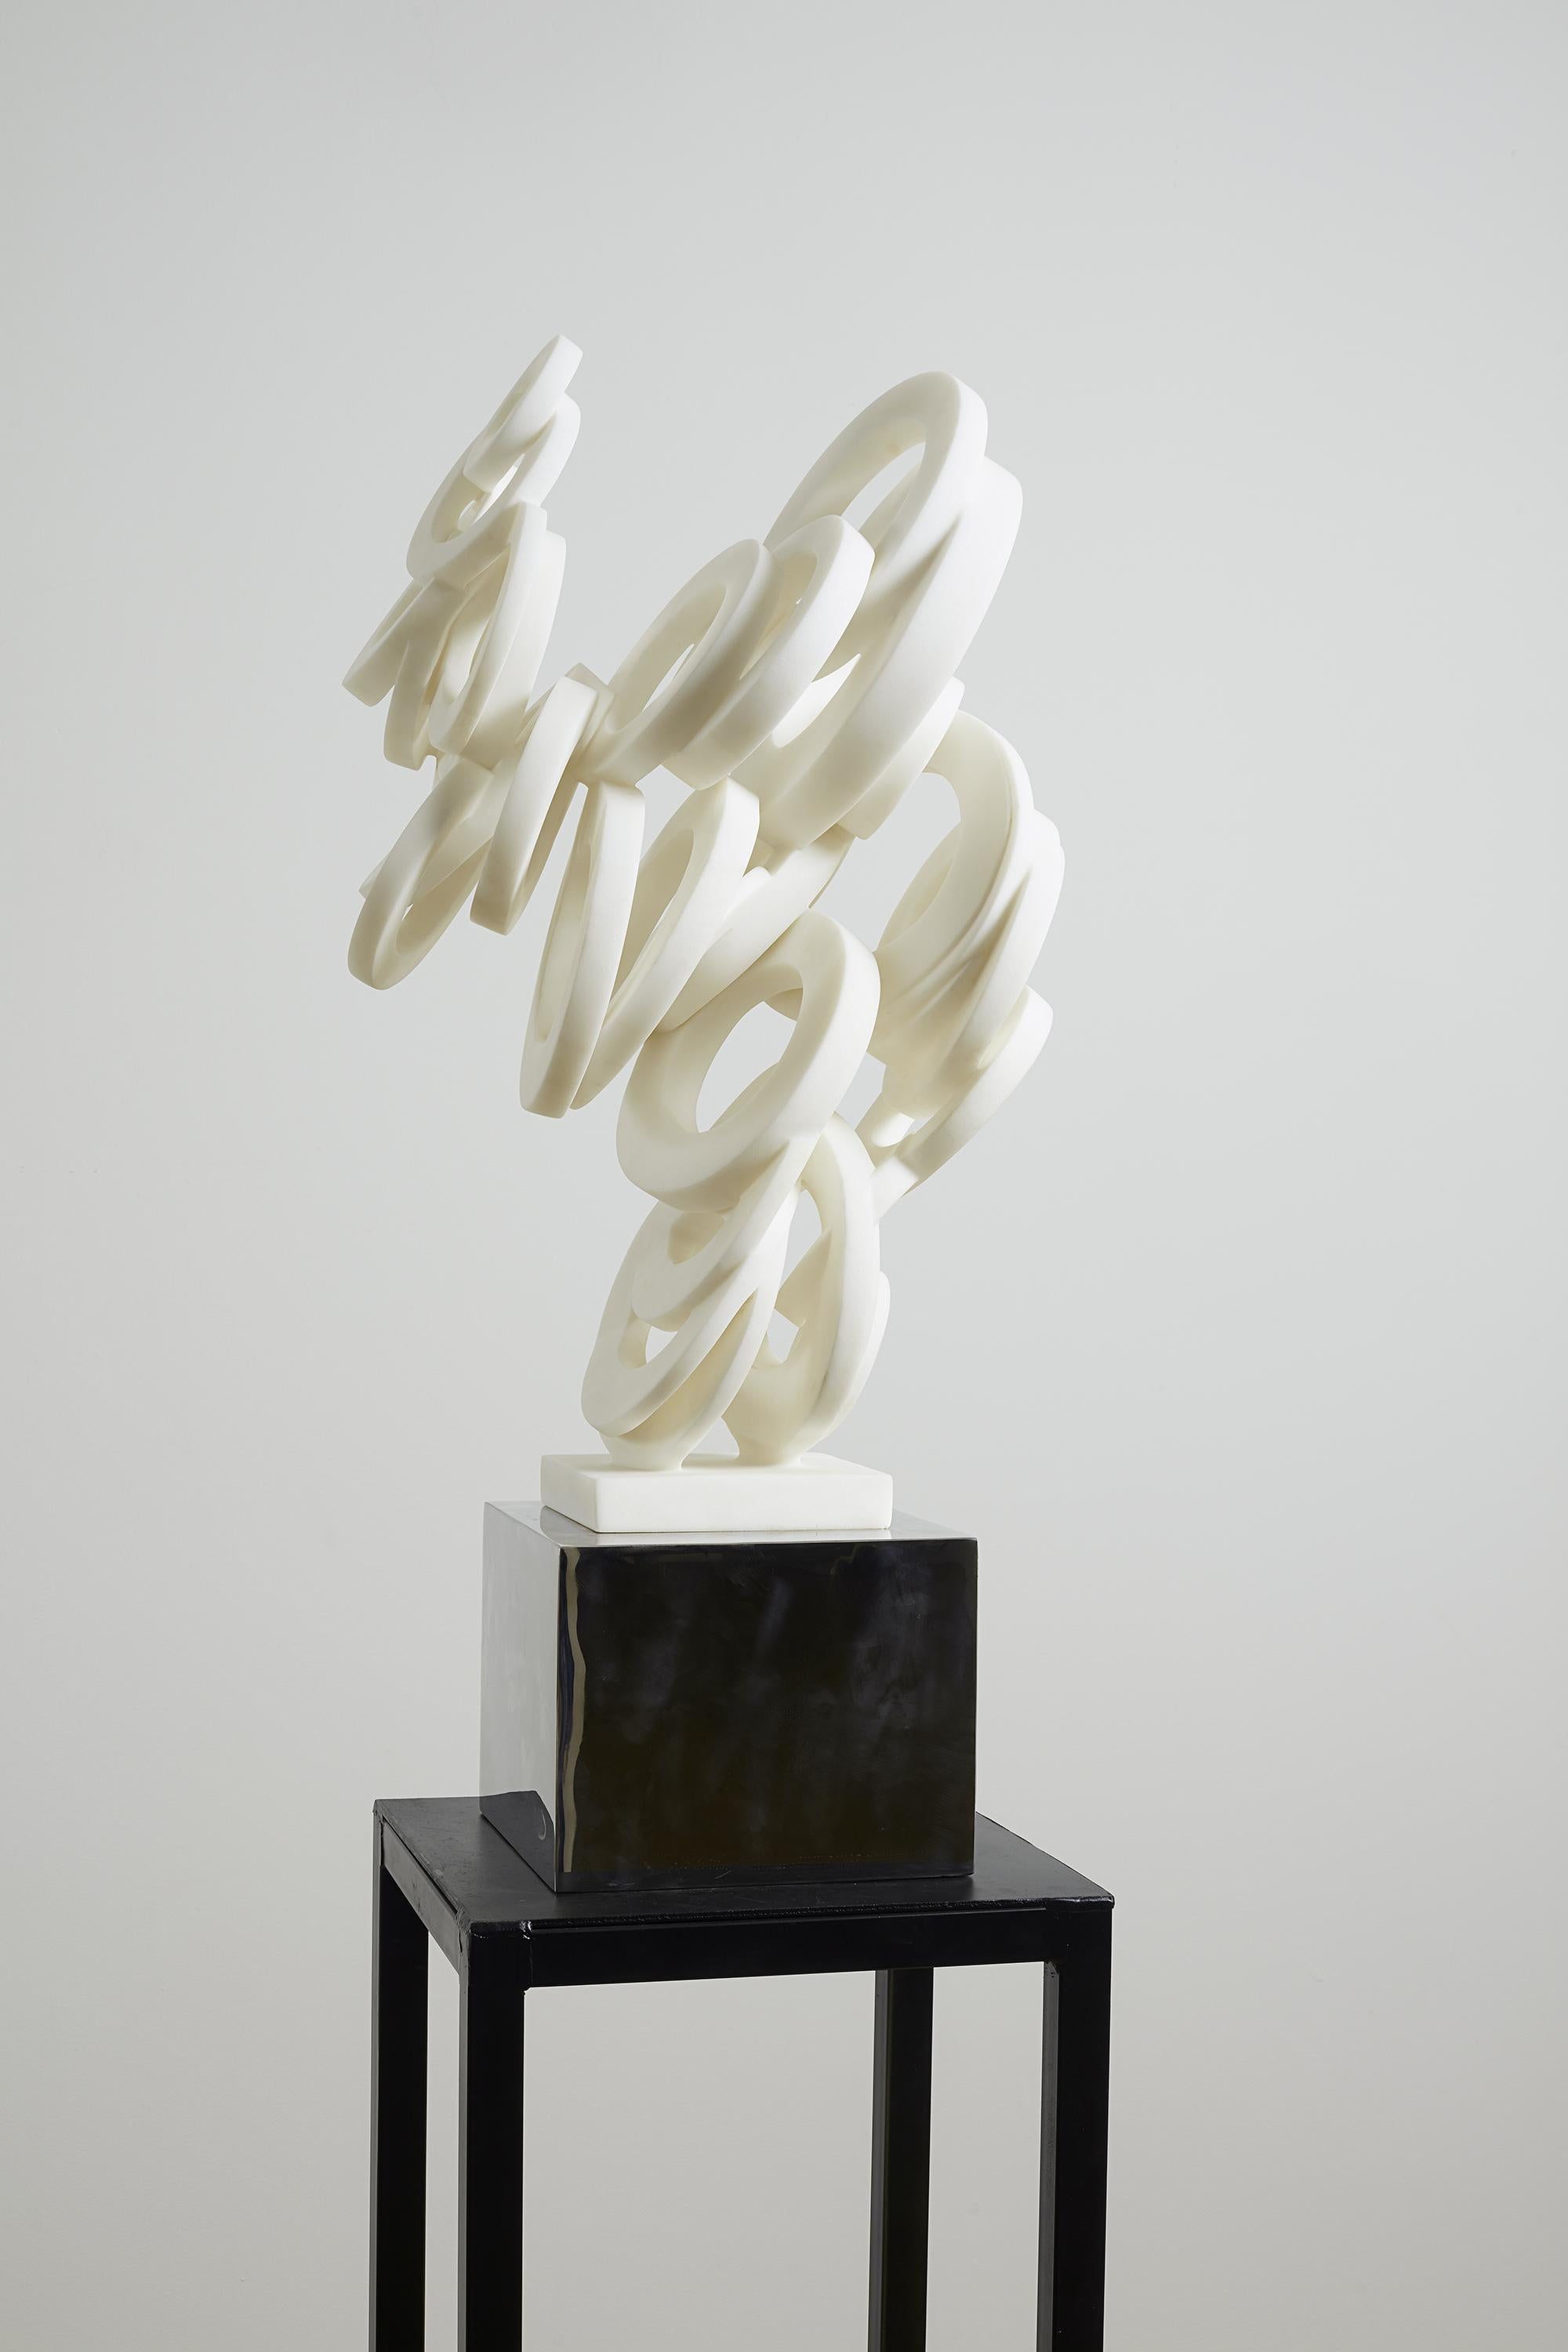 Hsu Yun Chin Abstract Sculpture - White Marble＆Stainless Sculpture "Chaos Theory-Cumulation", 2020